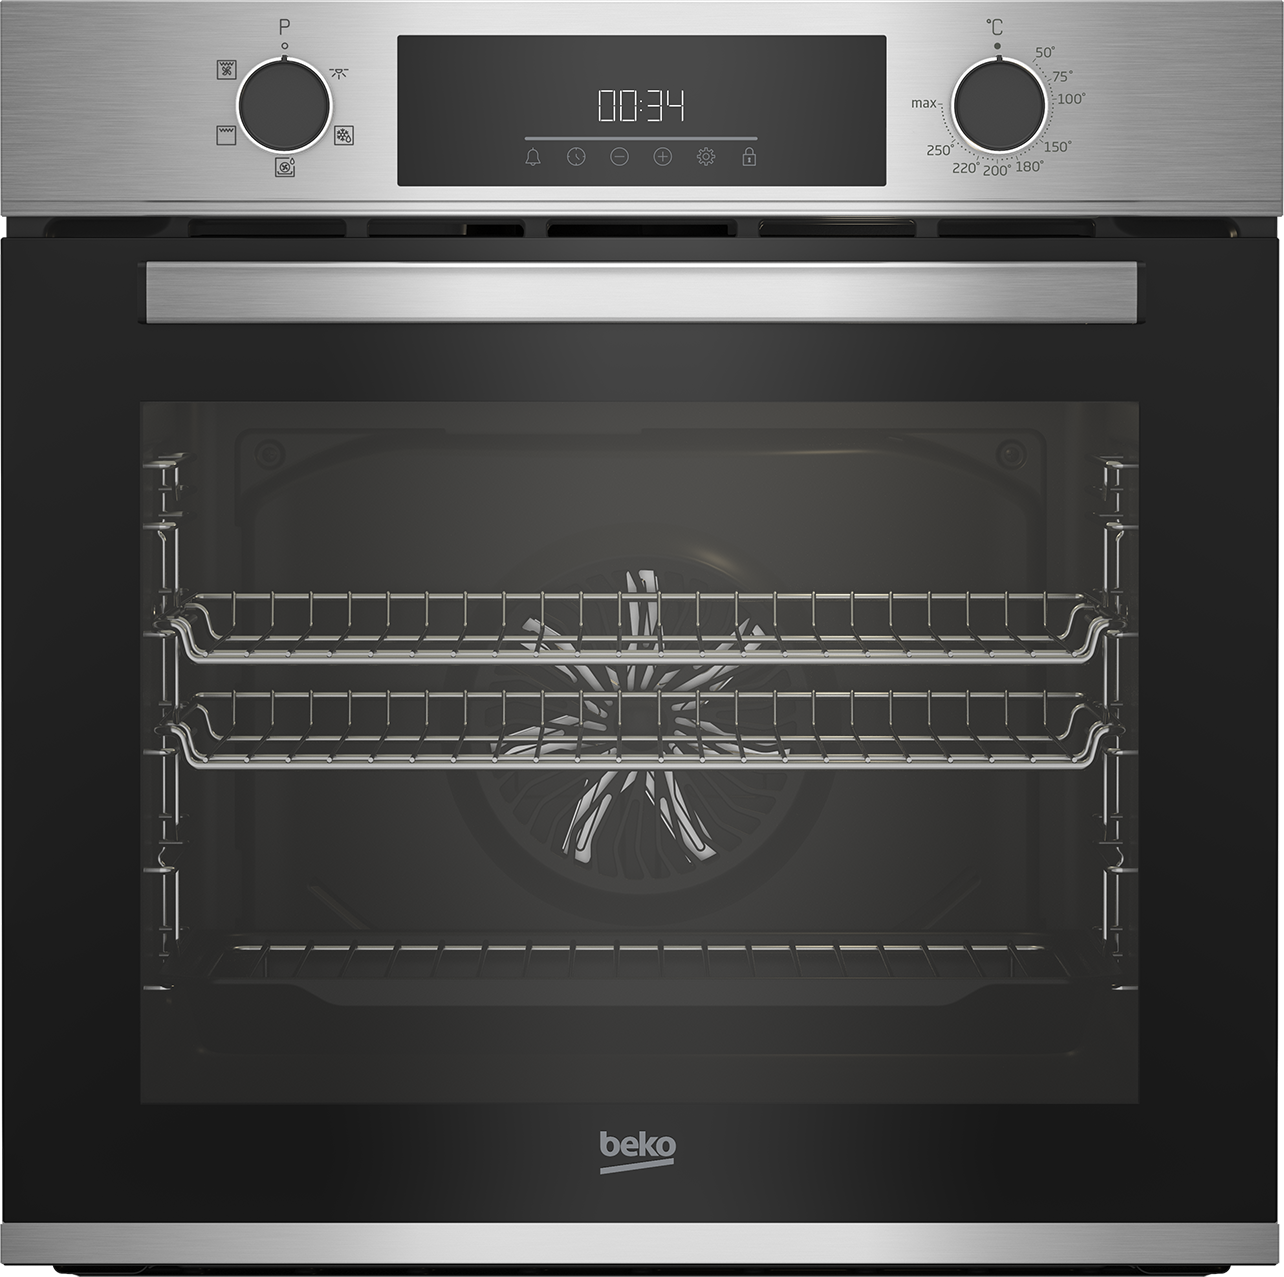 Beko AeroPerfect RecycledNet BBRIF22300X Built In Electric Single Oven - Stainless Steel - A Rated, Stainless Steel